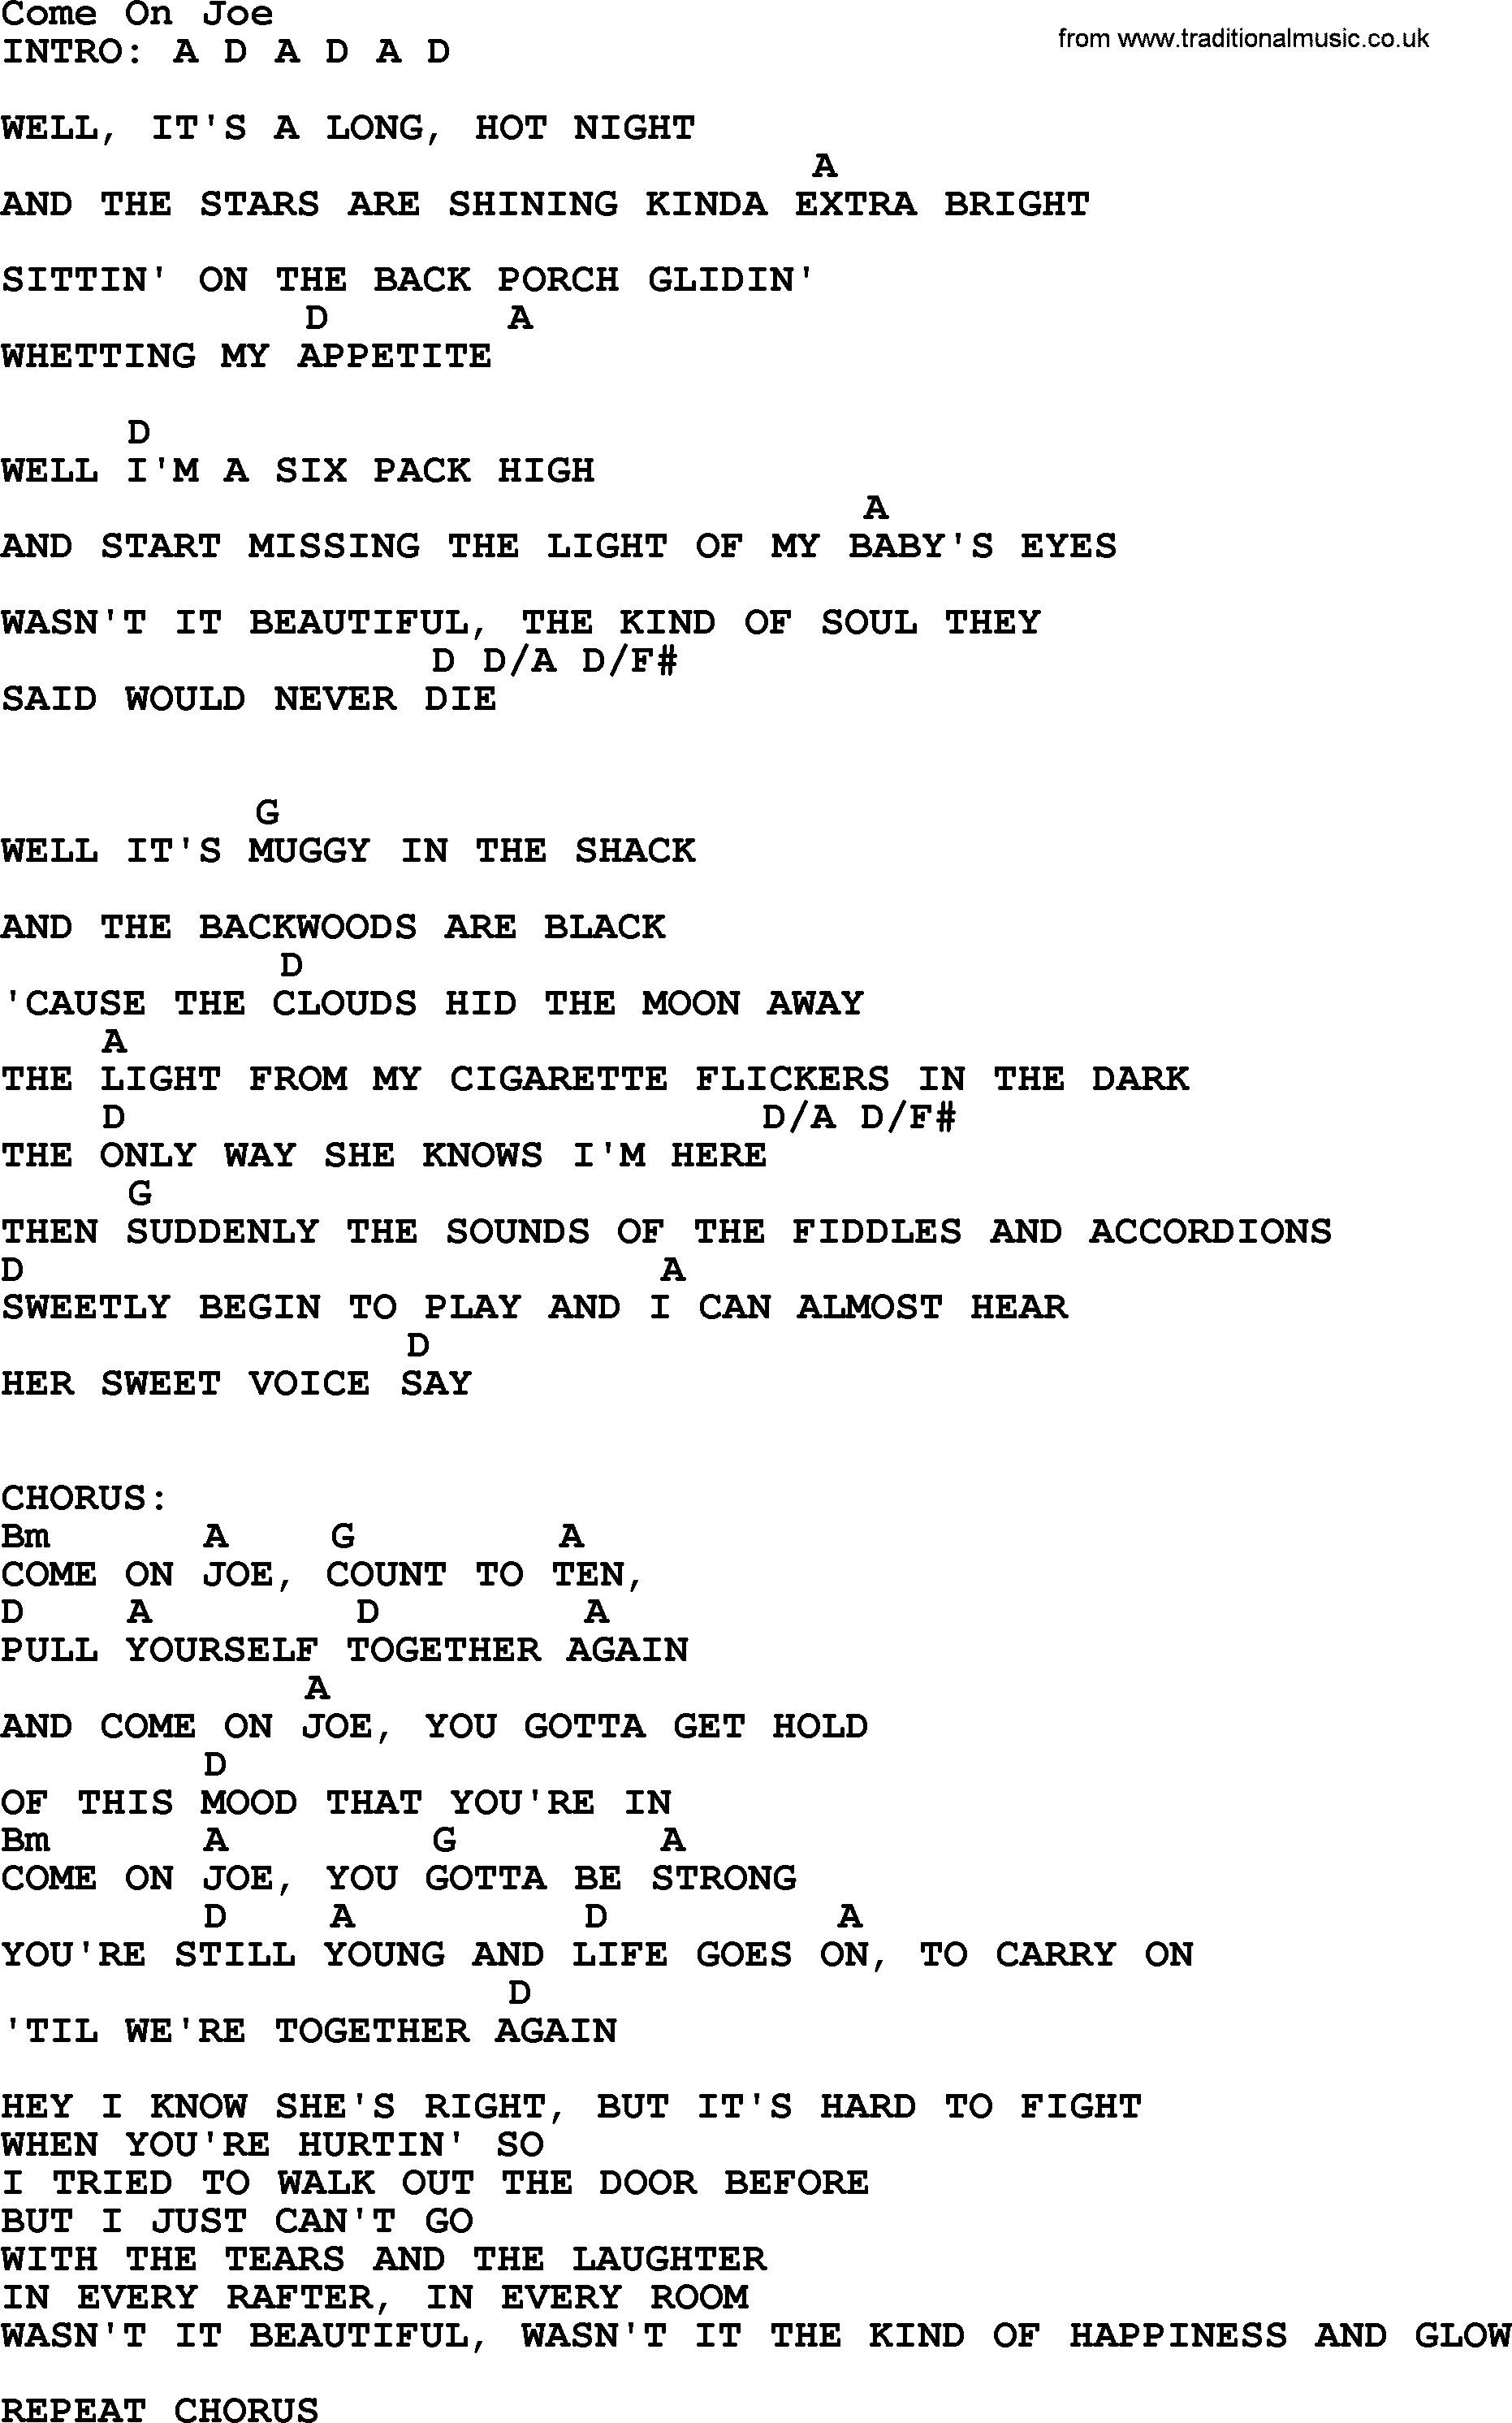 George Strait song: Come On Joe, lyrics and chords